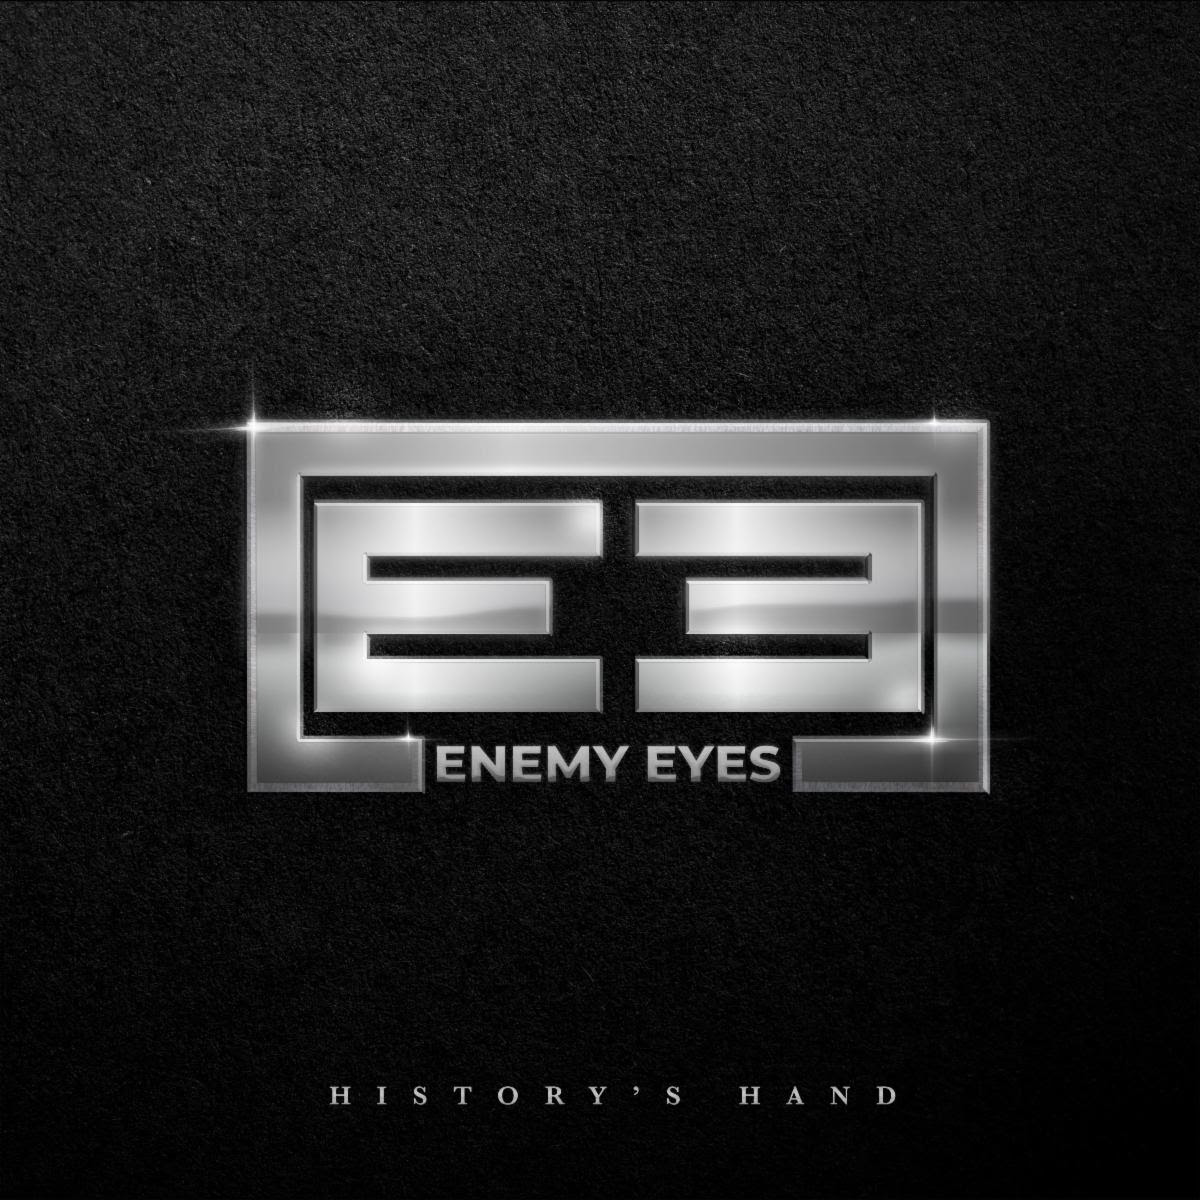 ENEMY EYES ANNOUNCE DEBUT ALBUM "HISTORY'S HAND"